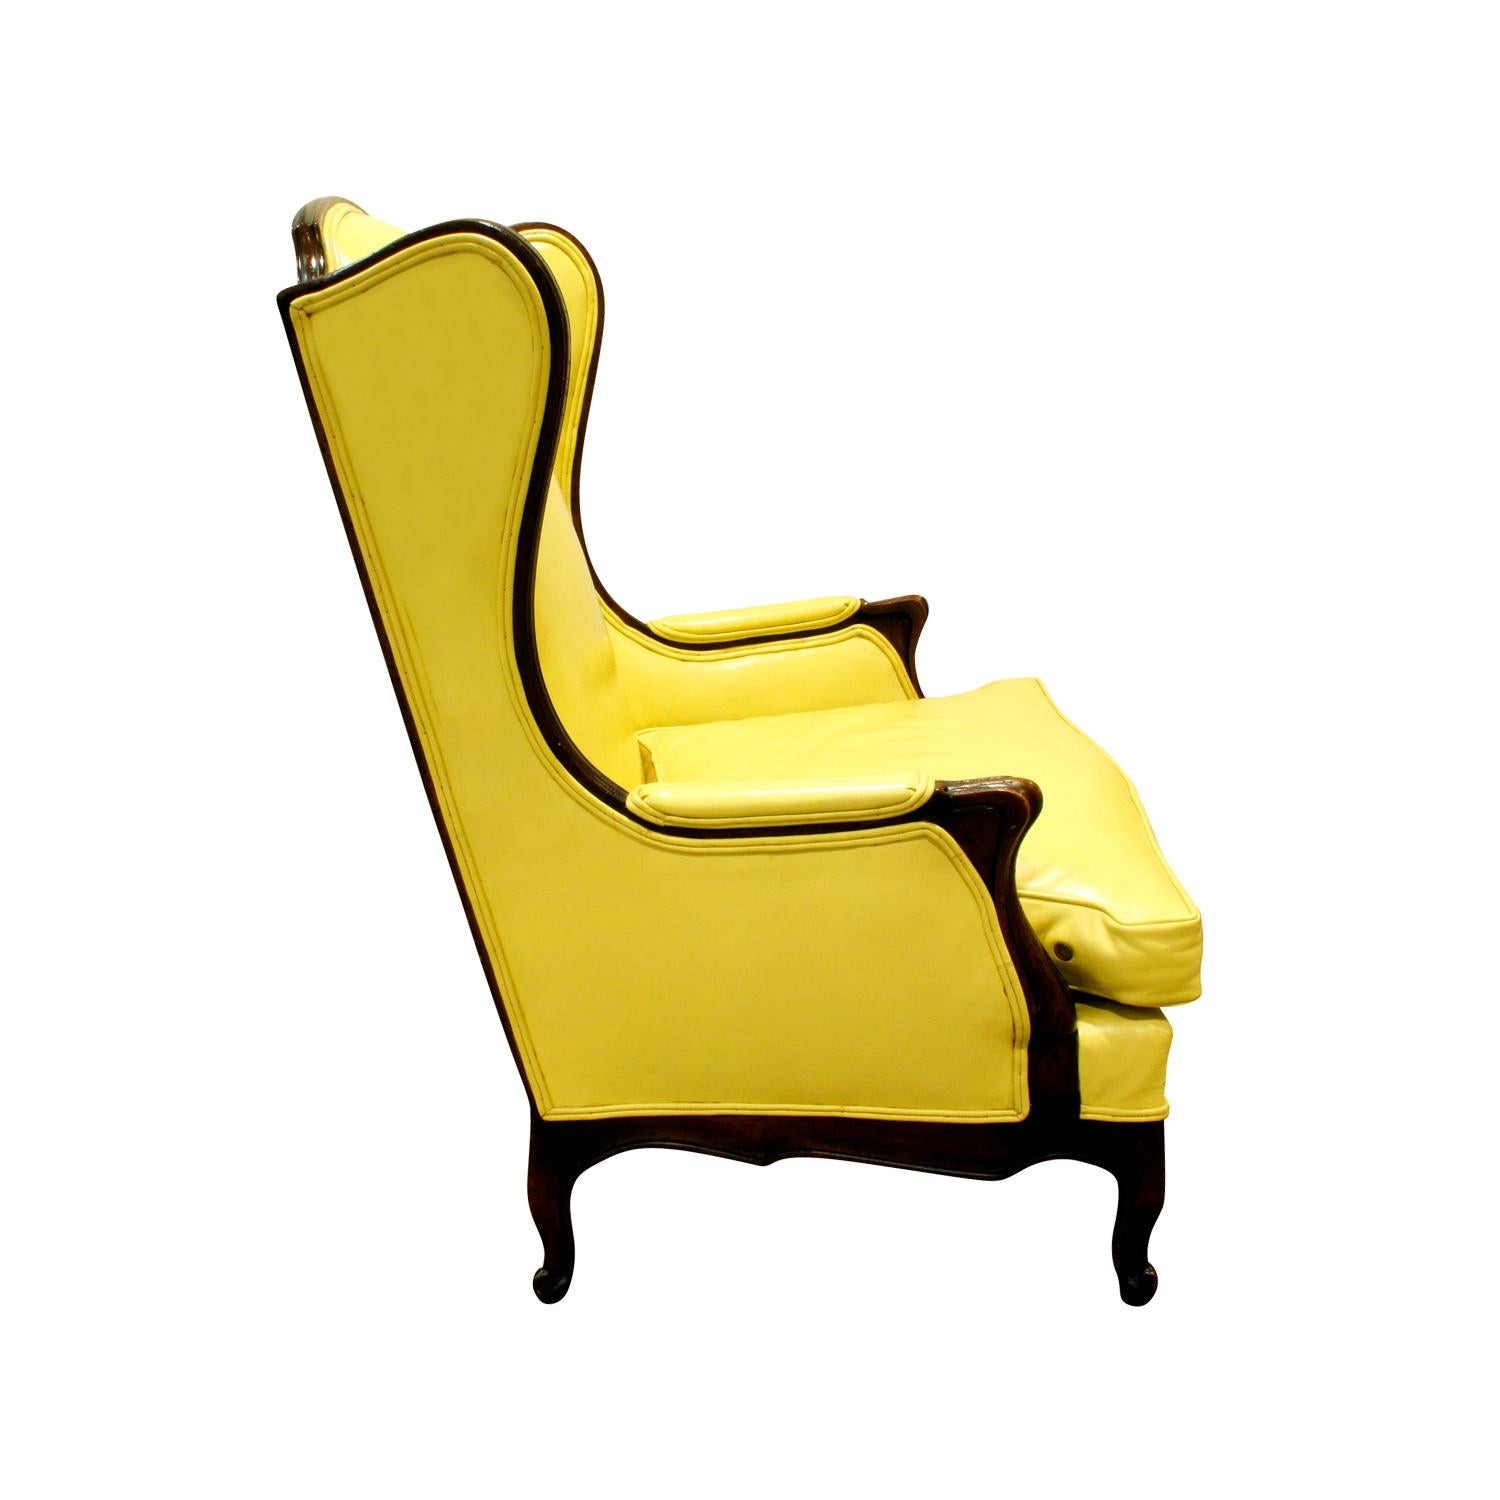 American Custom-Made Regency Style Wing Chair, 1950s, Signed For Sale